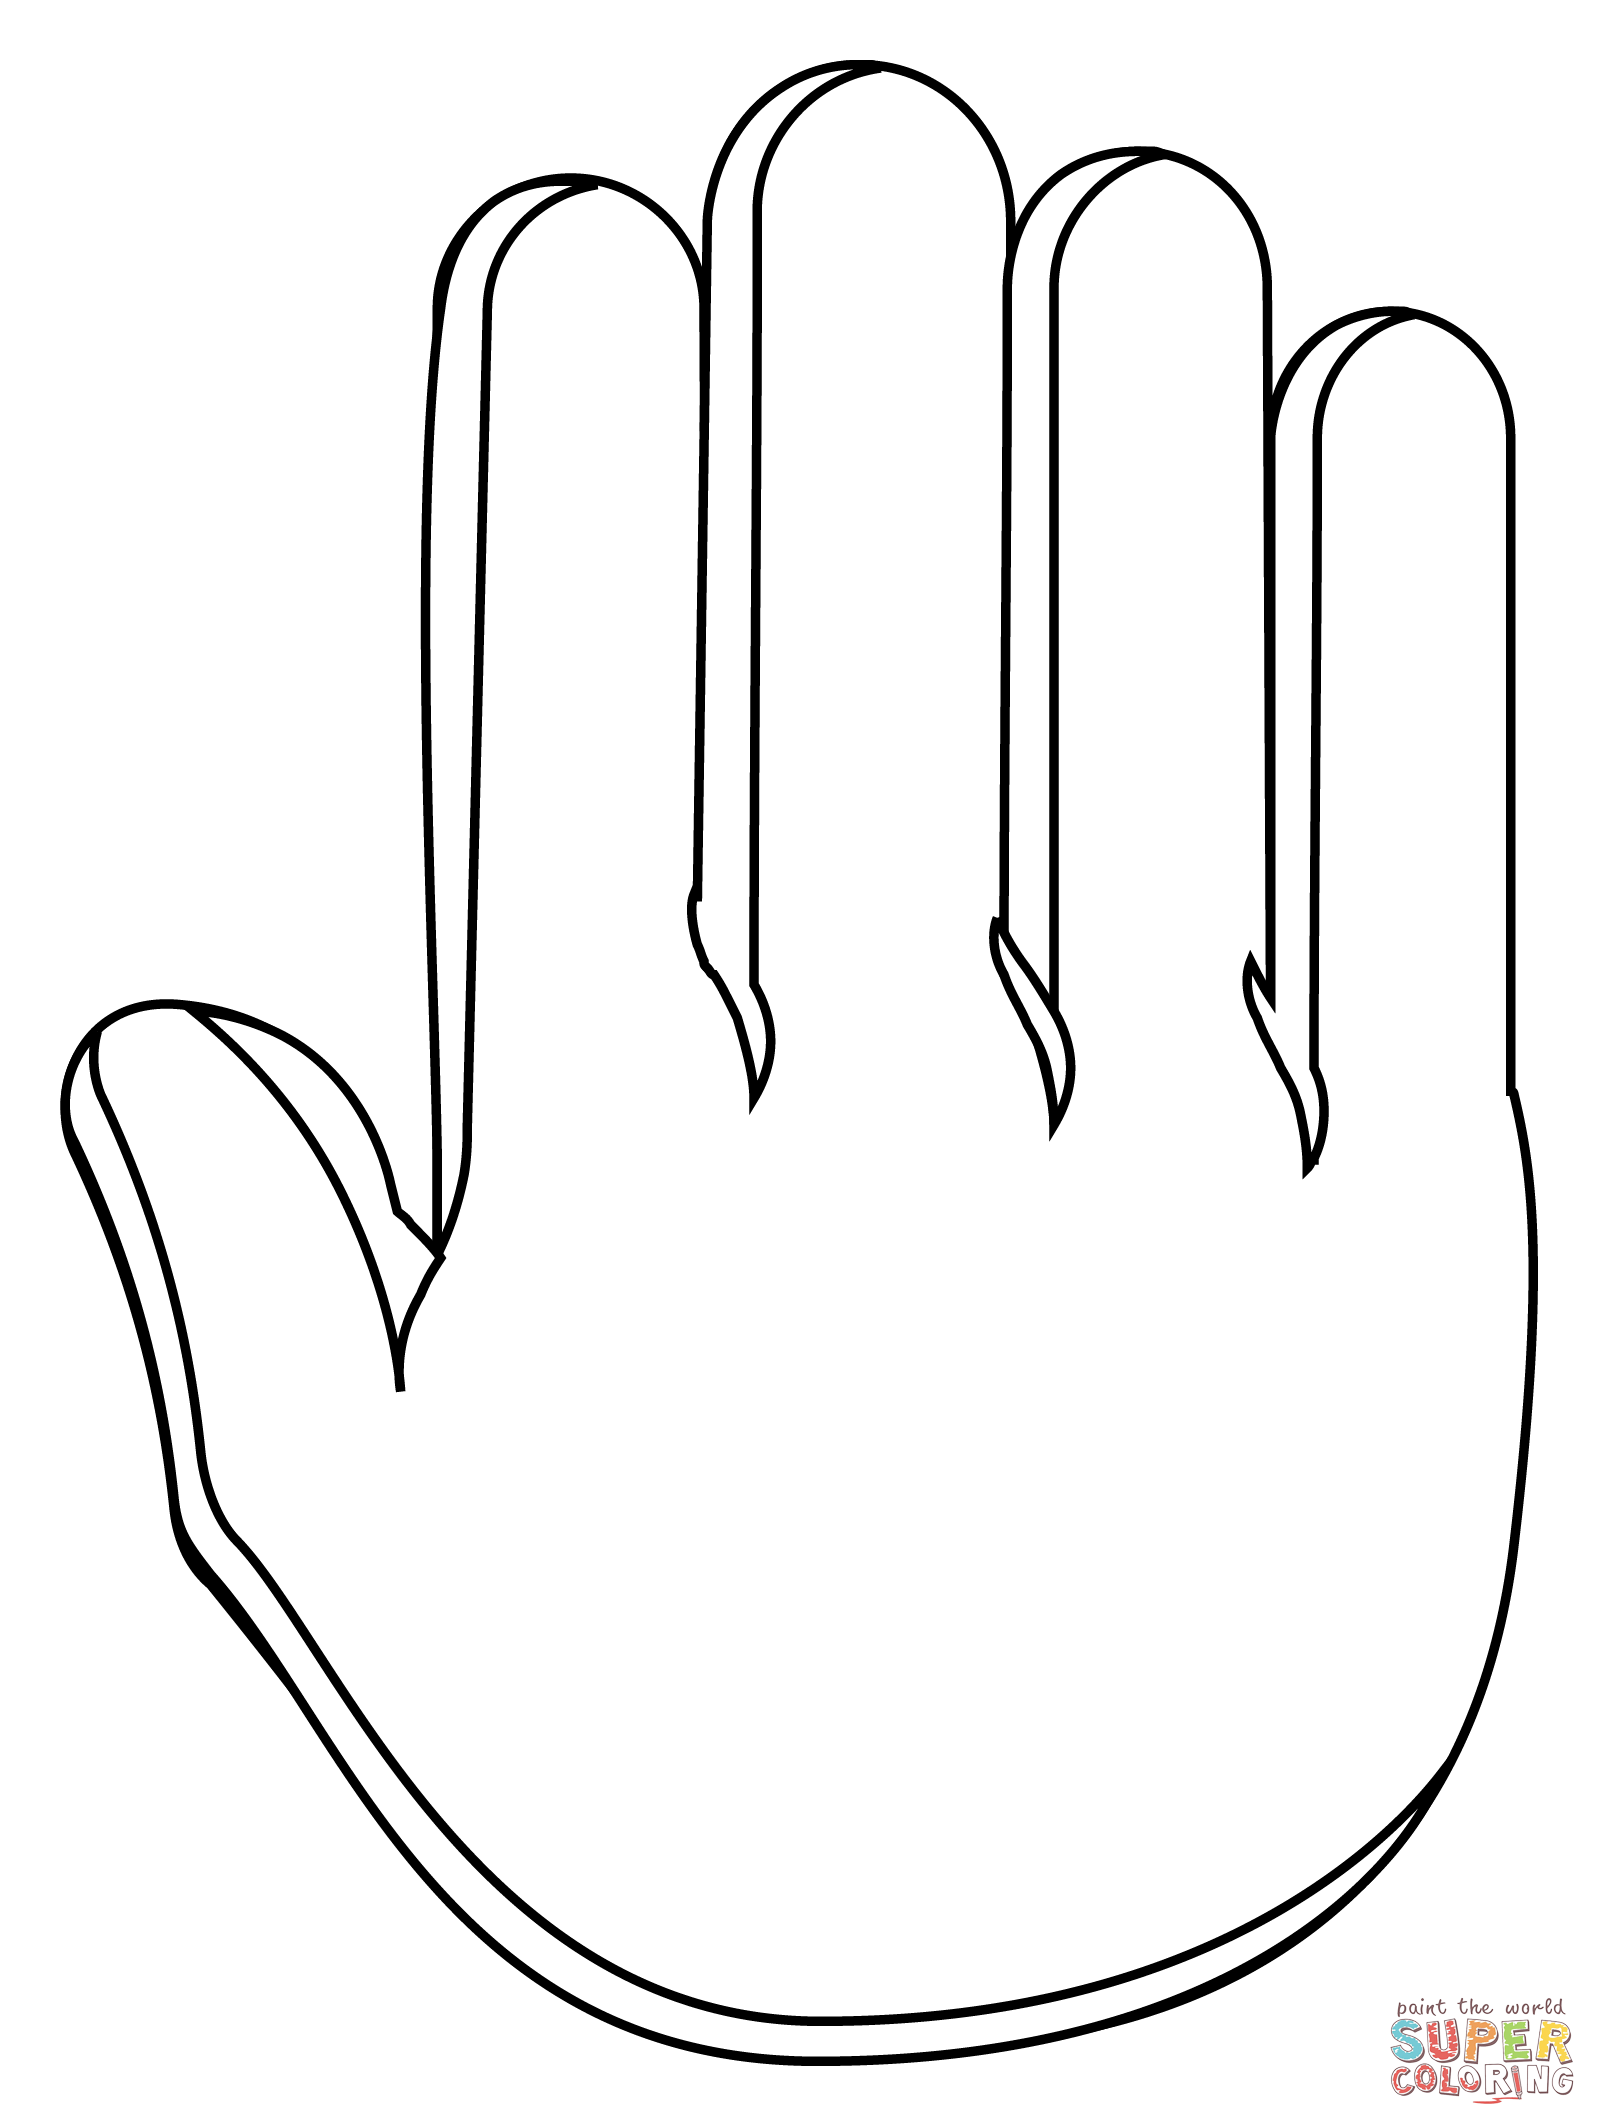 Raised back of hand coloring page free printable coloring pages